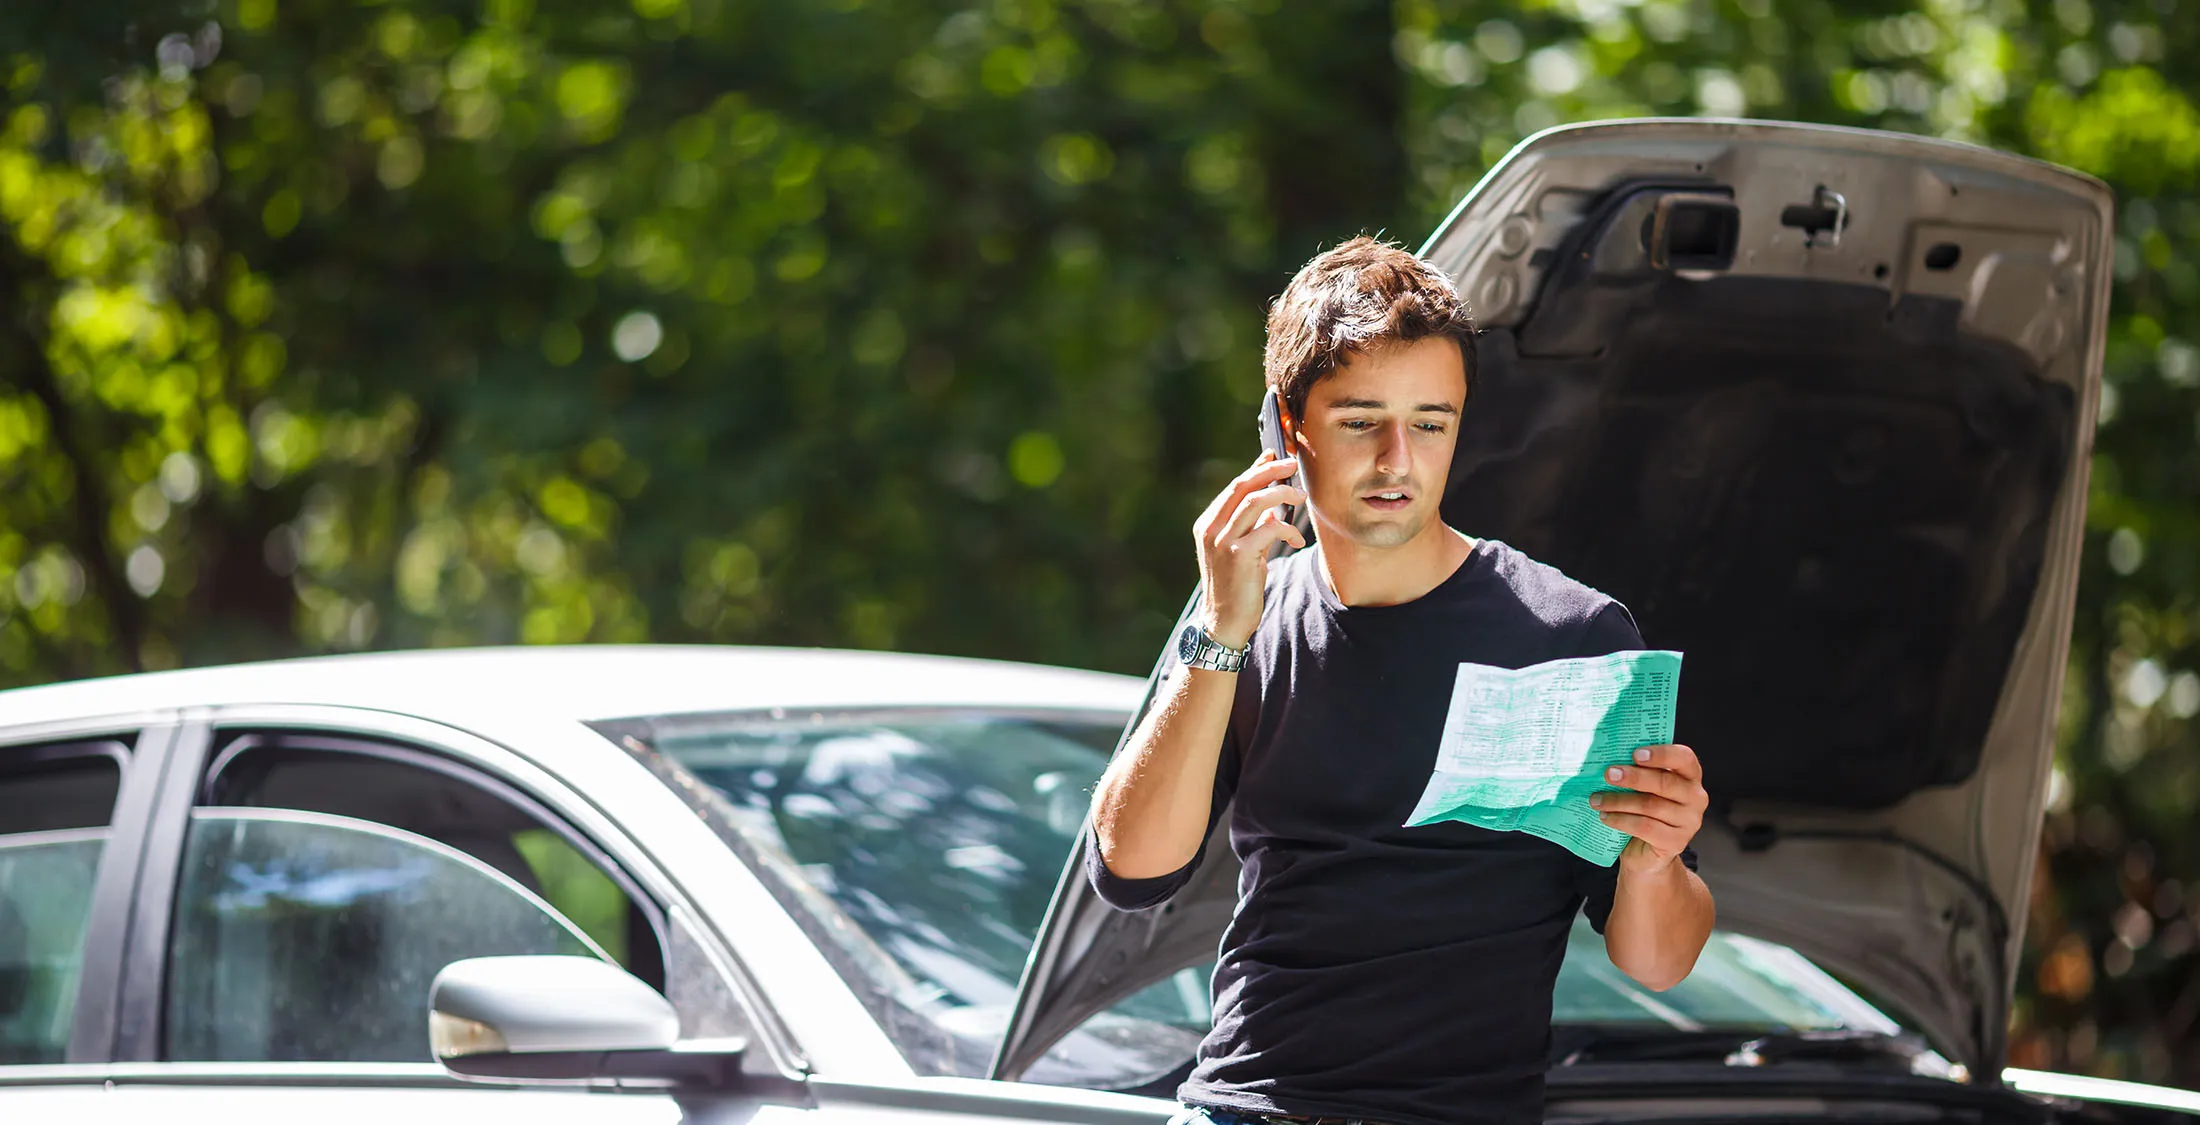 man on phone in front of car